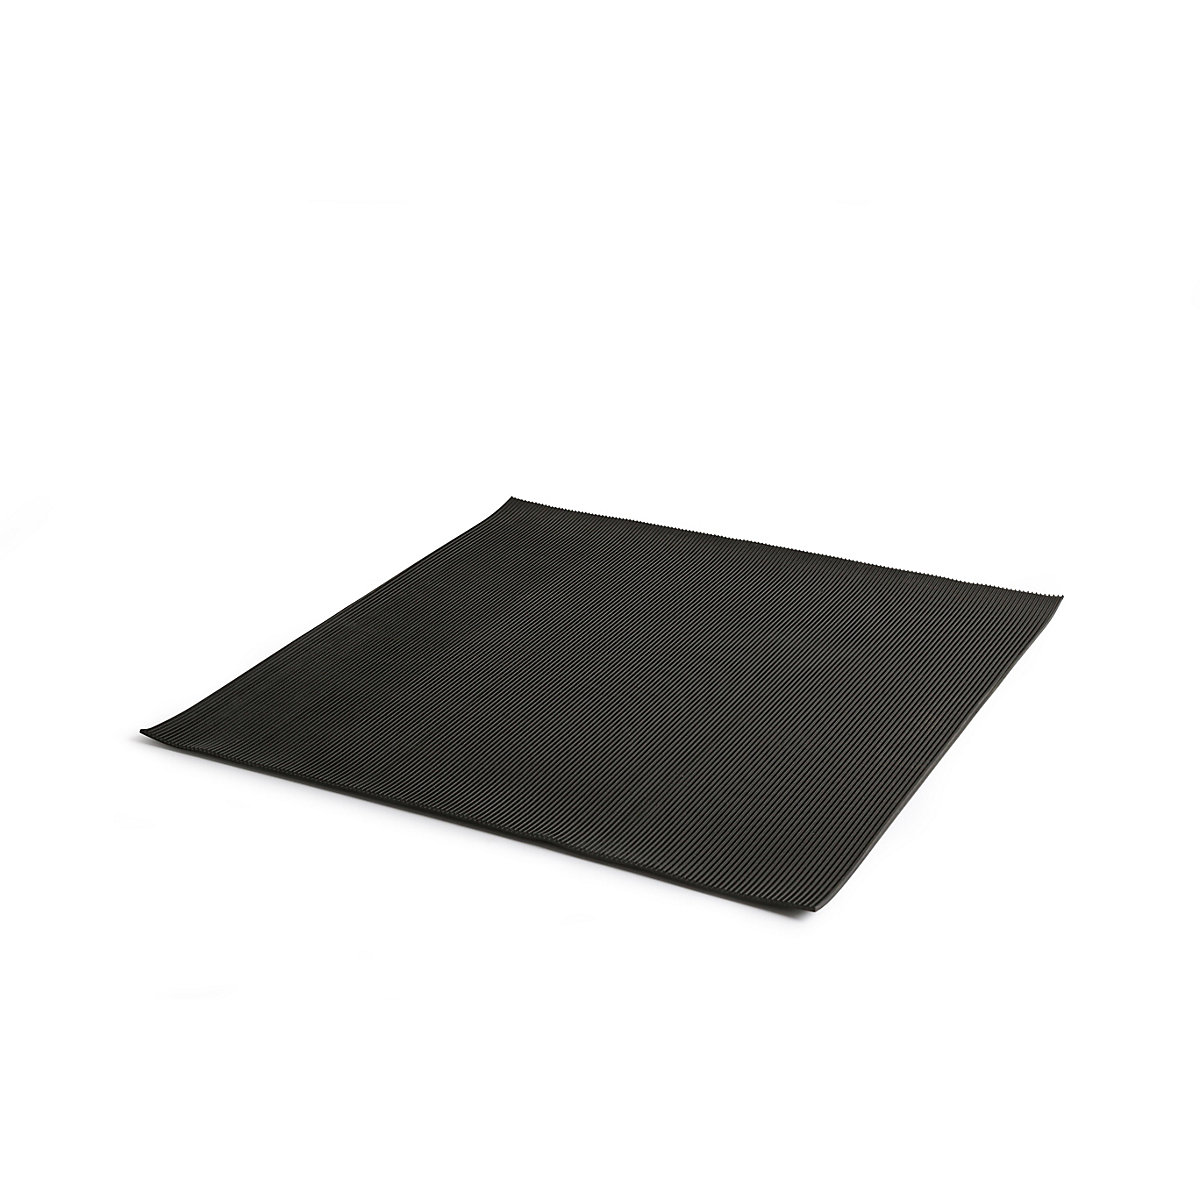 Ribbed rubber cover for tool cupboard – eurokraft pro